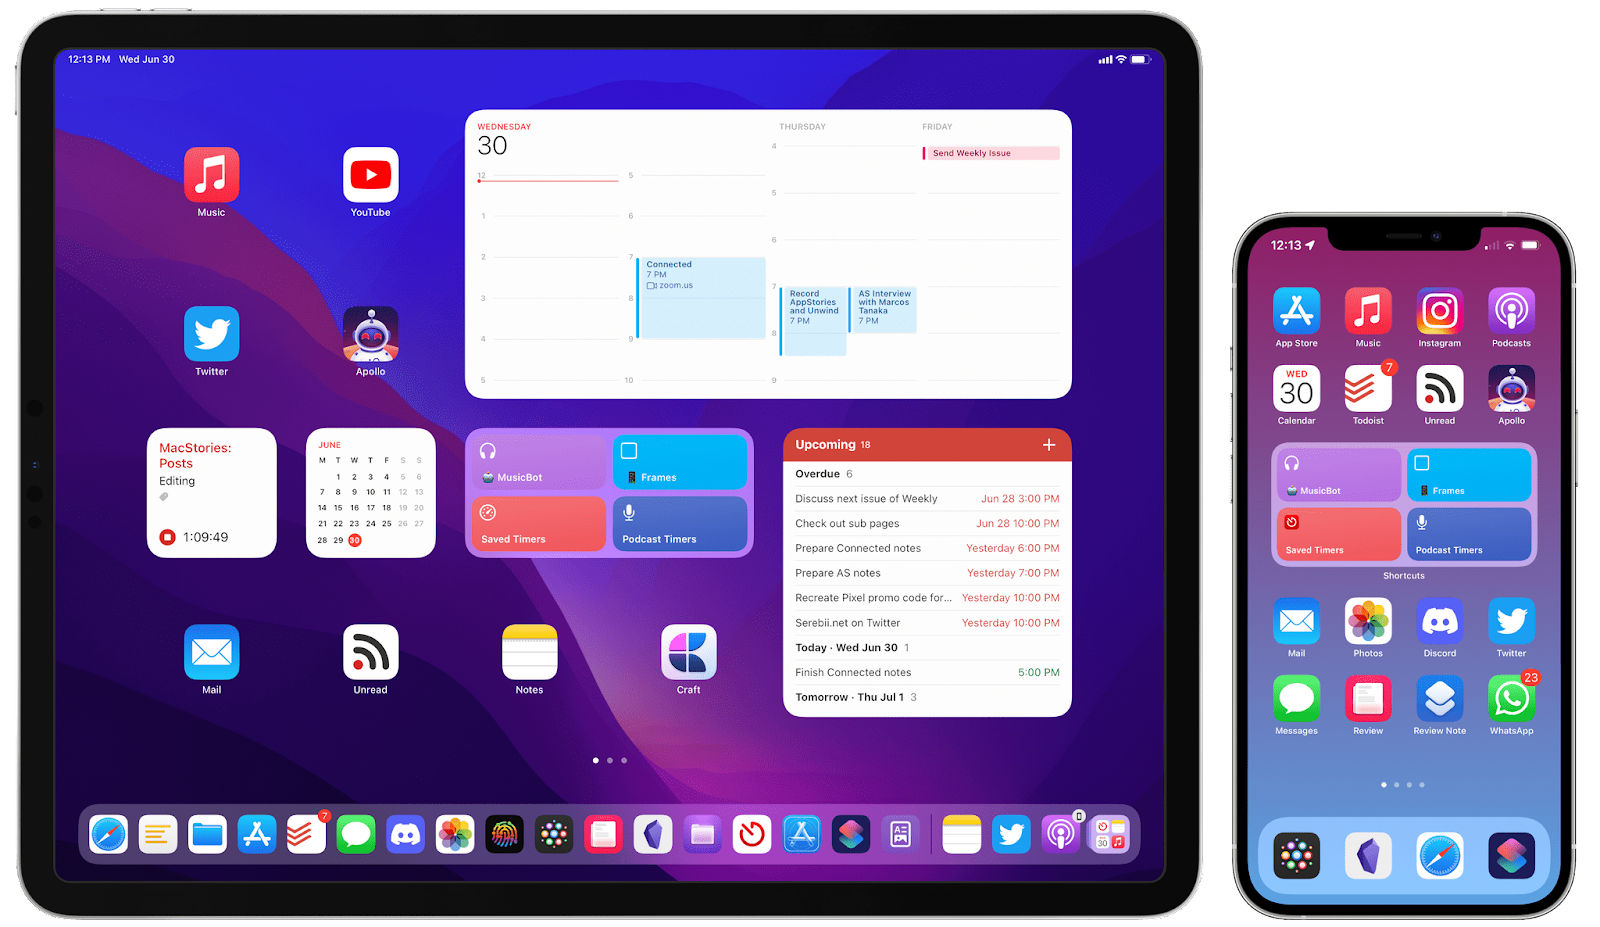 [https://www.macstories.net/stories/three-weeks-with-ios-and-ipados-15-foundational-updates/](https://www.macstories.net/stories/three-weeks-with-ios-and-ipados-15-foundational-updates/)